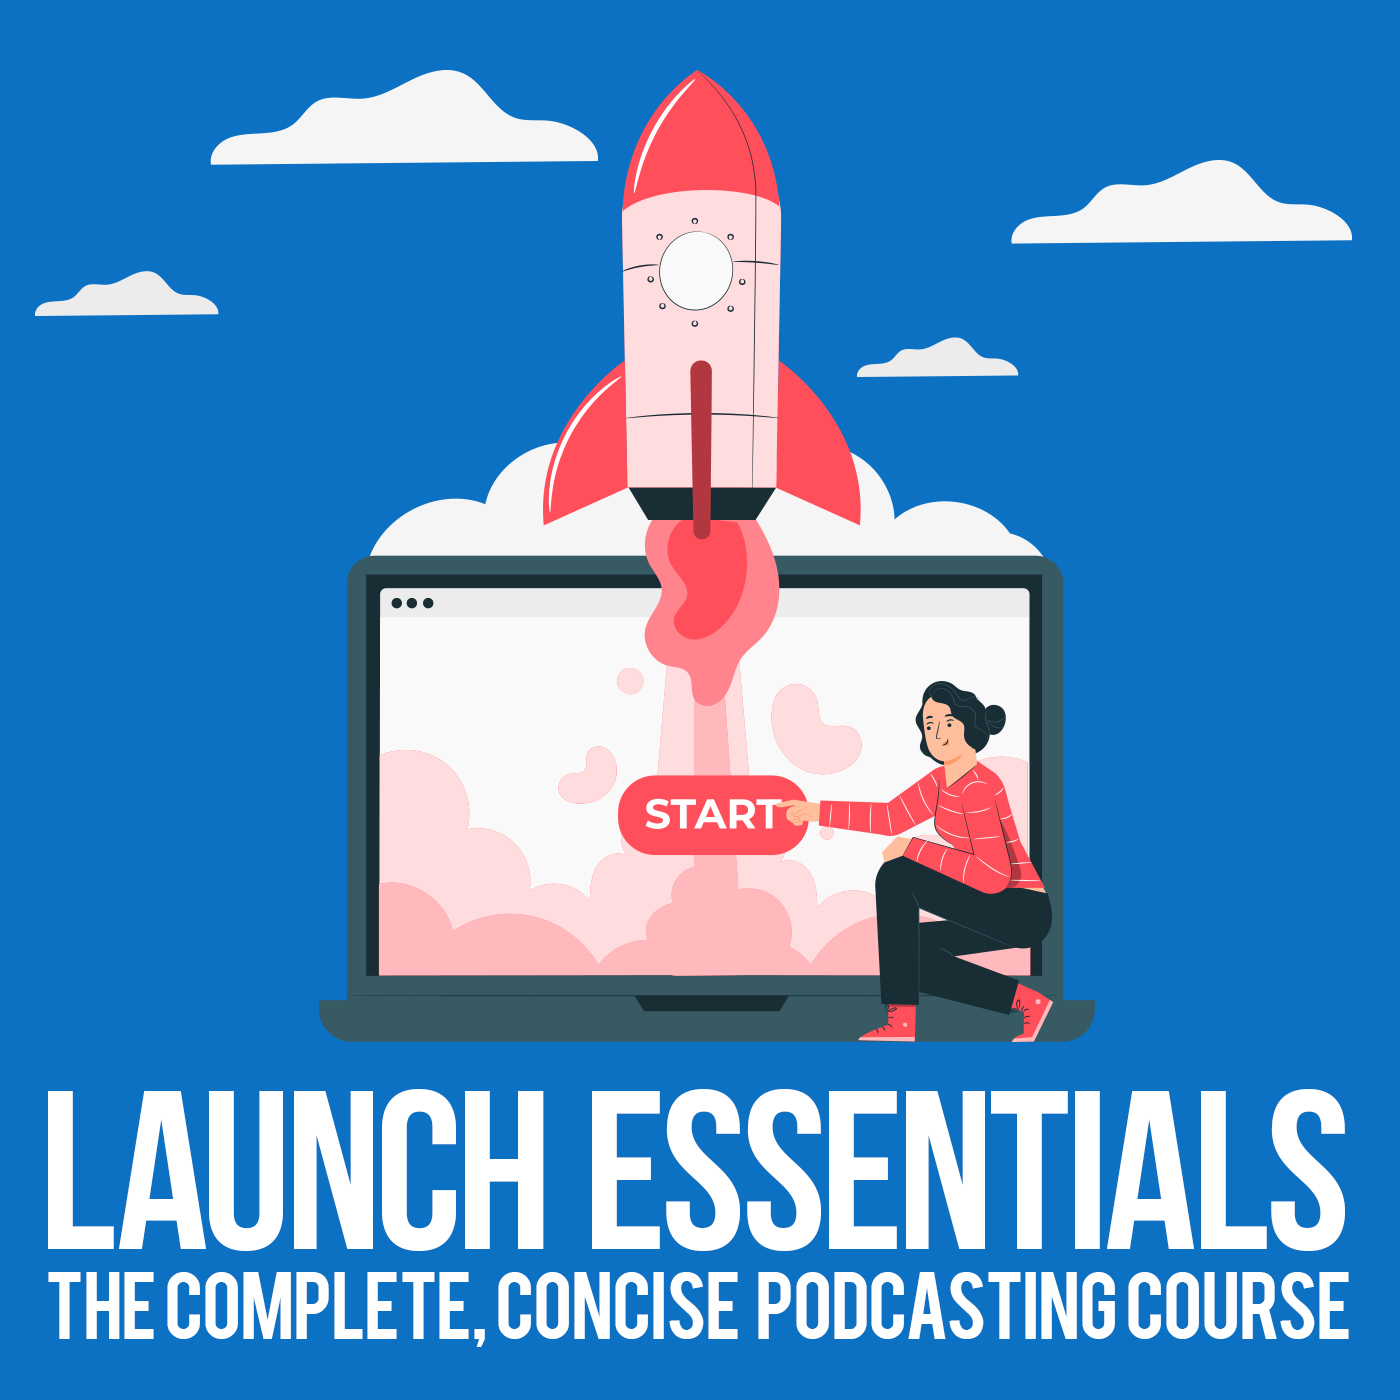 Thumbnail for item called: 'Podcast Launch Essentials Course'